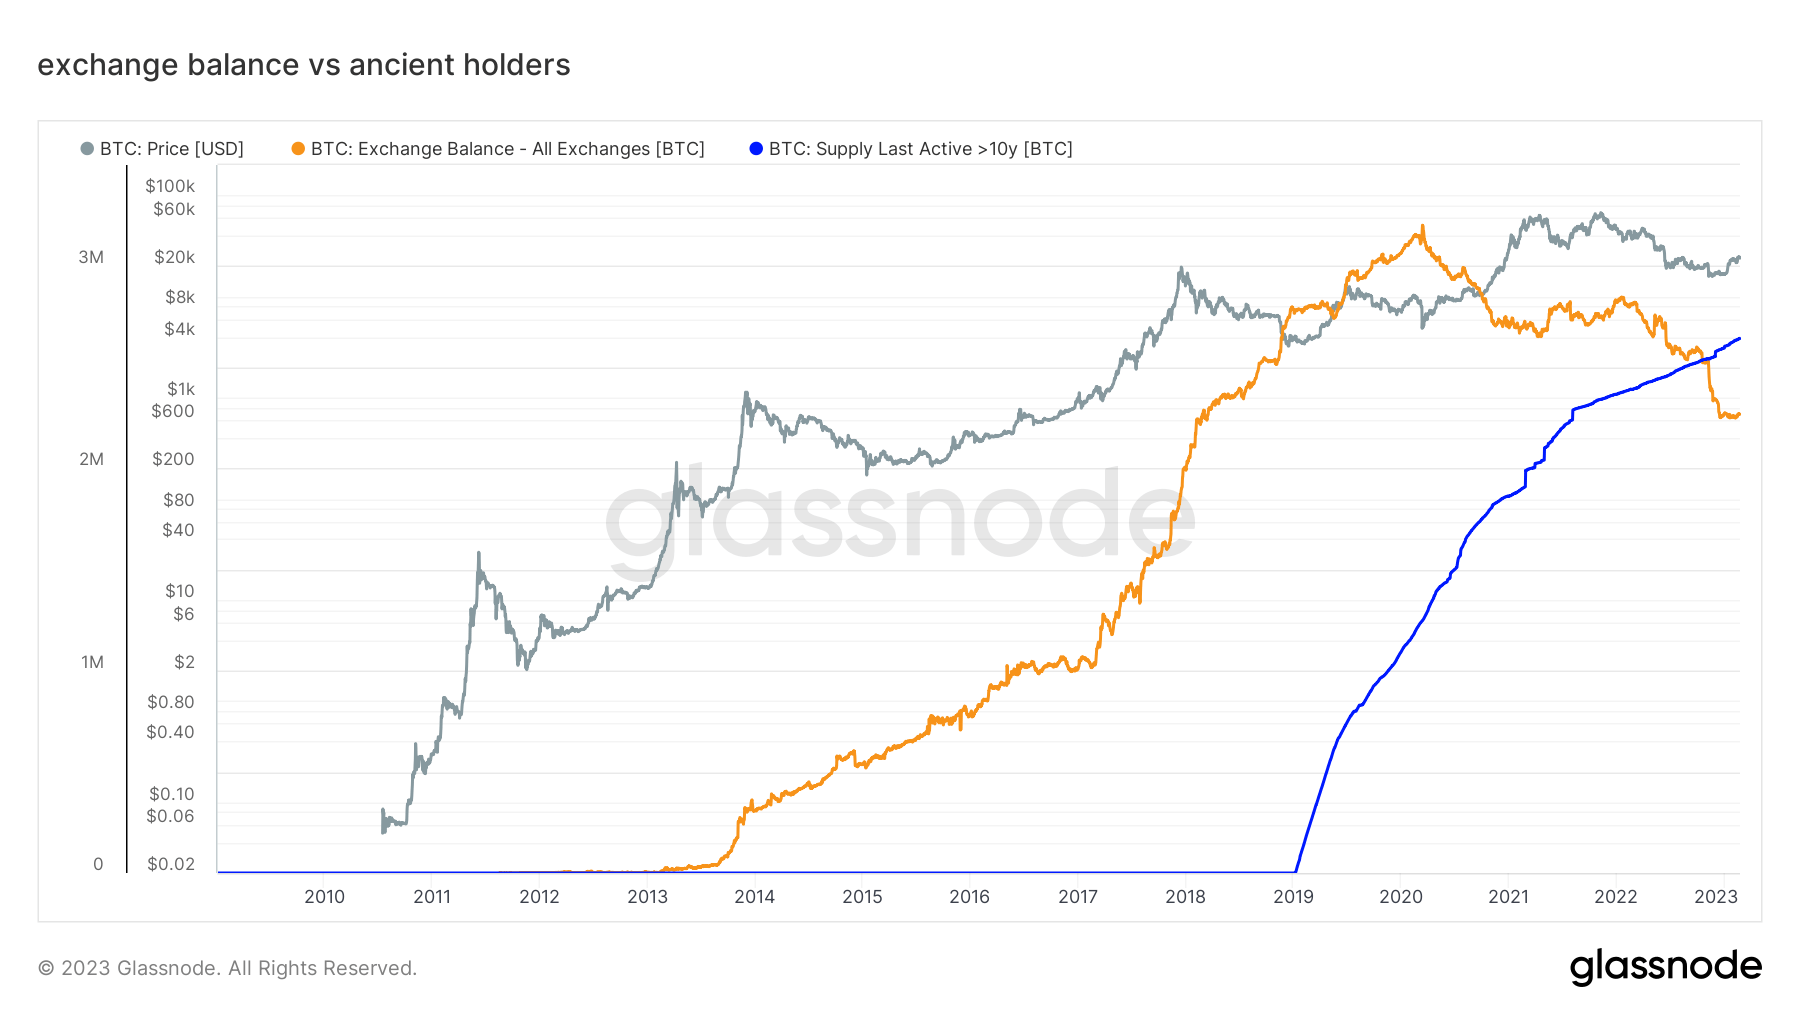 Group of Bitcoin holders since 2013 holds more BTC than all exchanges